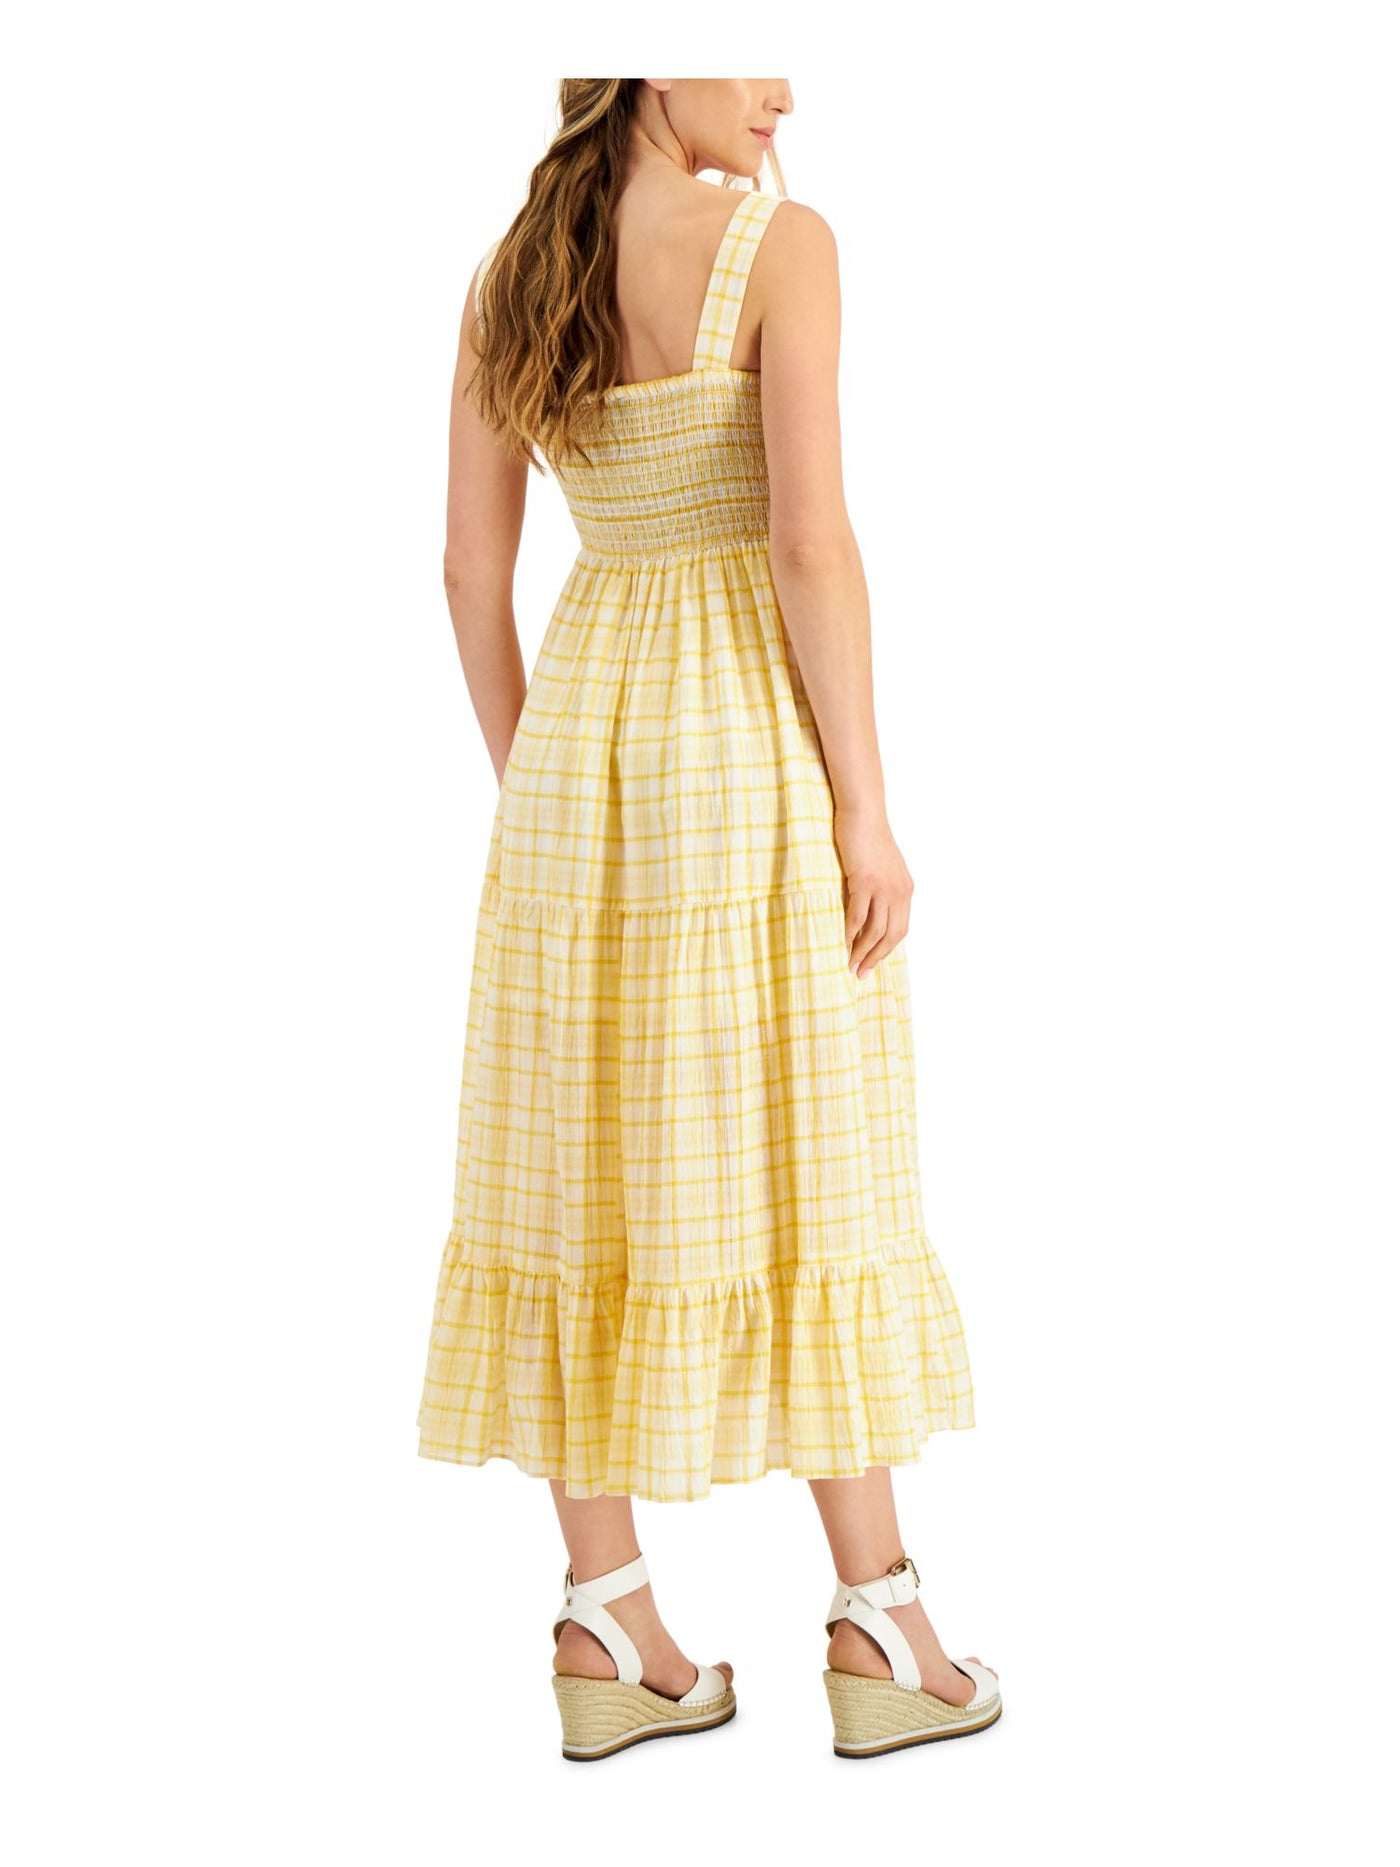 TOMMY HILFIGER Womens Yellow Smocked Pullover Tiered Skirt Lined Plaid Sleeveless Square Neck Midi Fit + Flare Dress XS